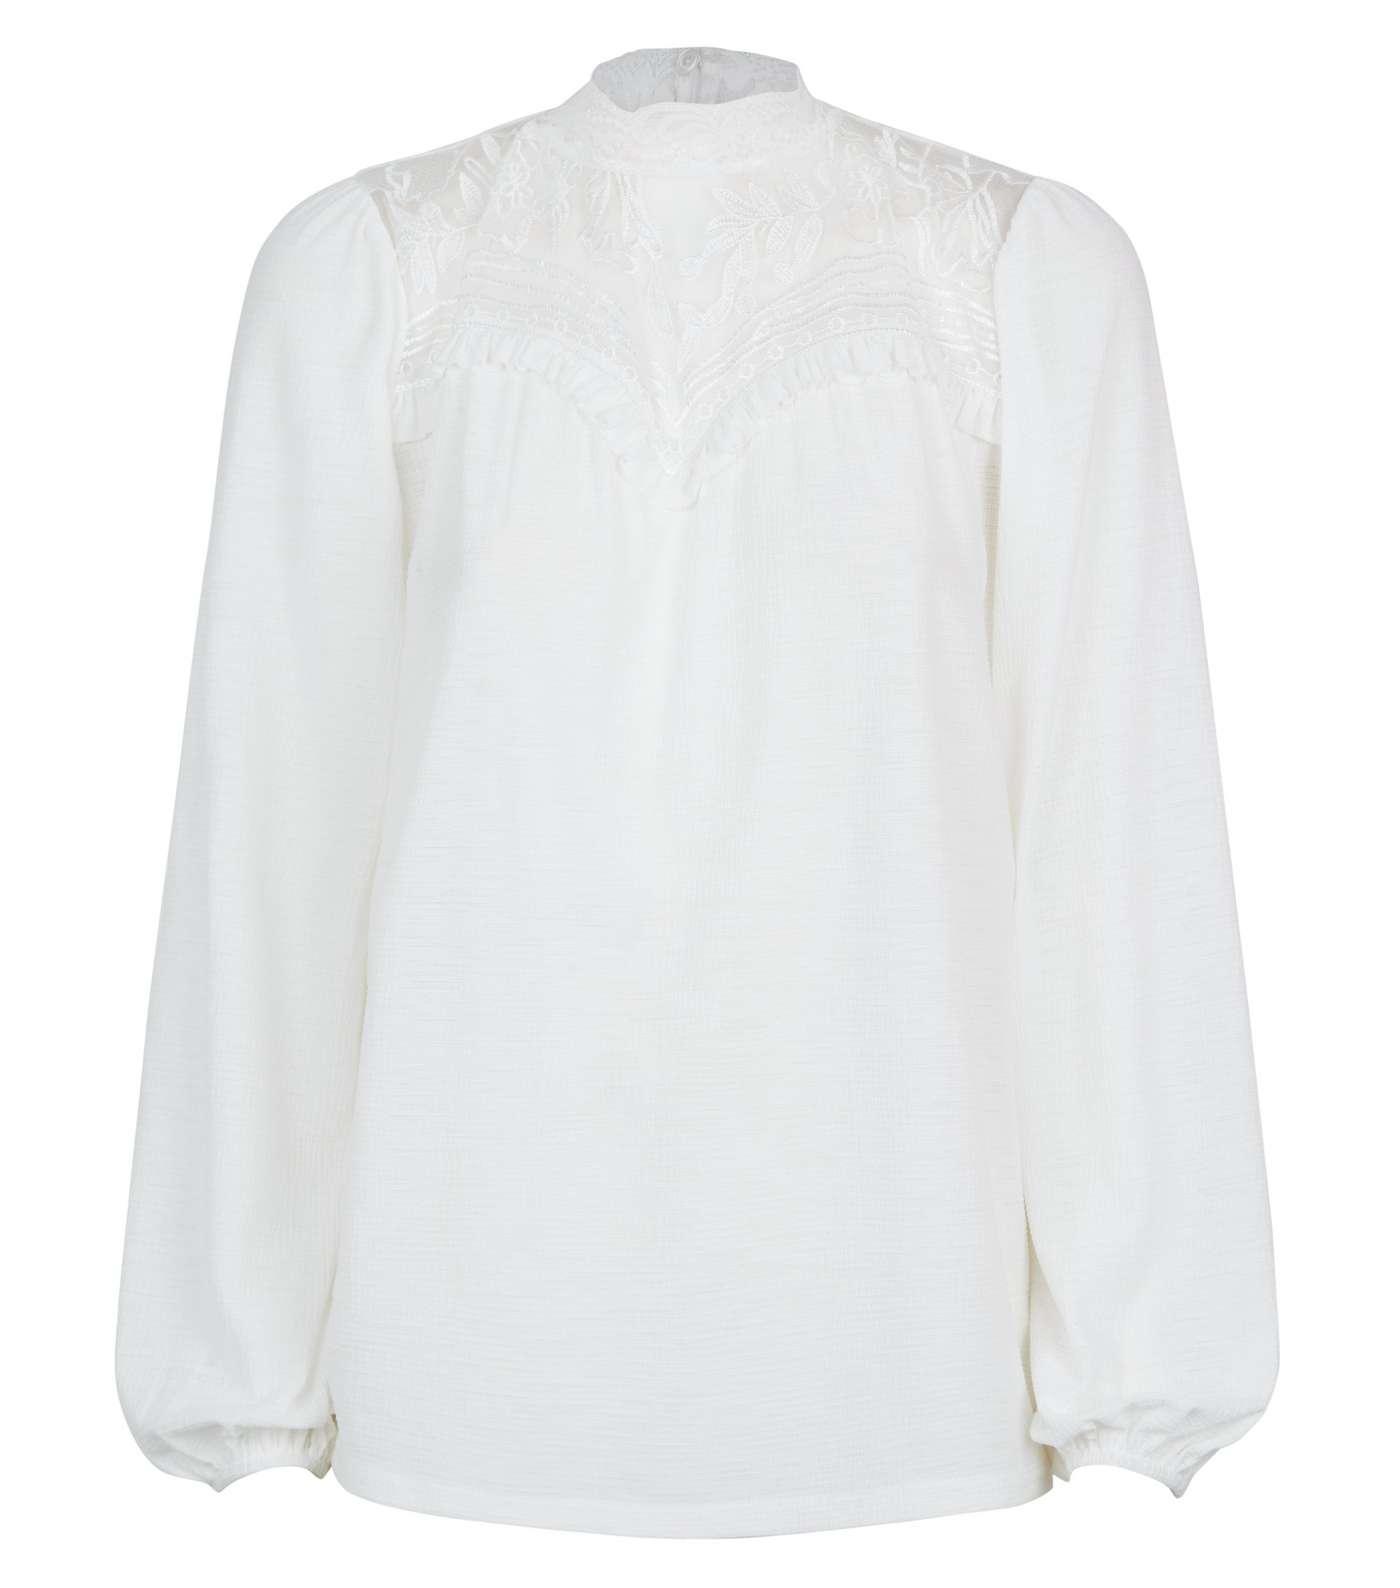 Off White Textured Embroidered Yoke Top Image 4